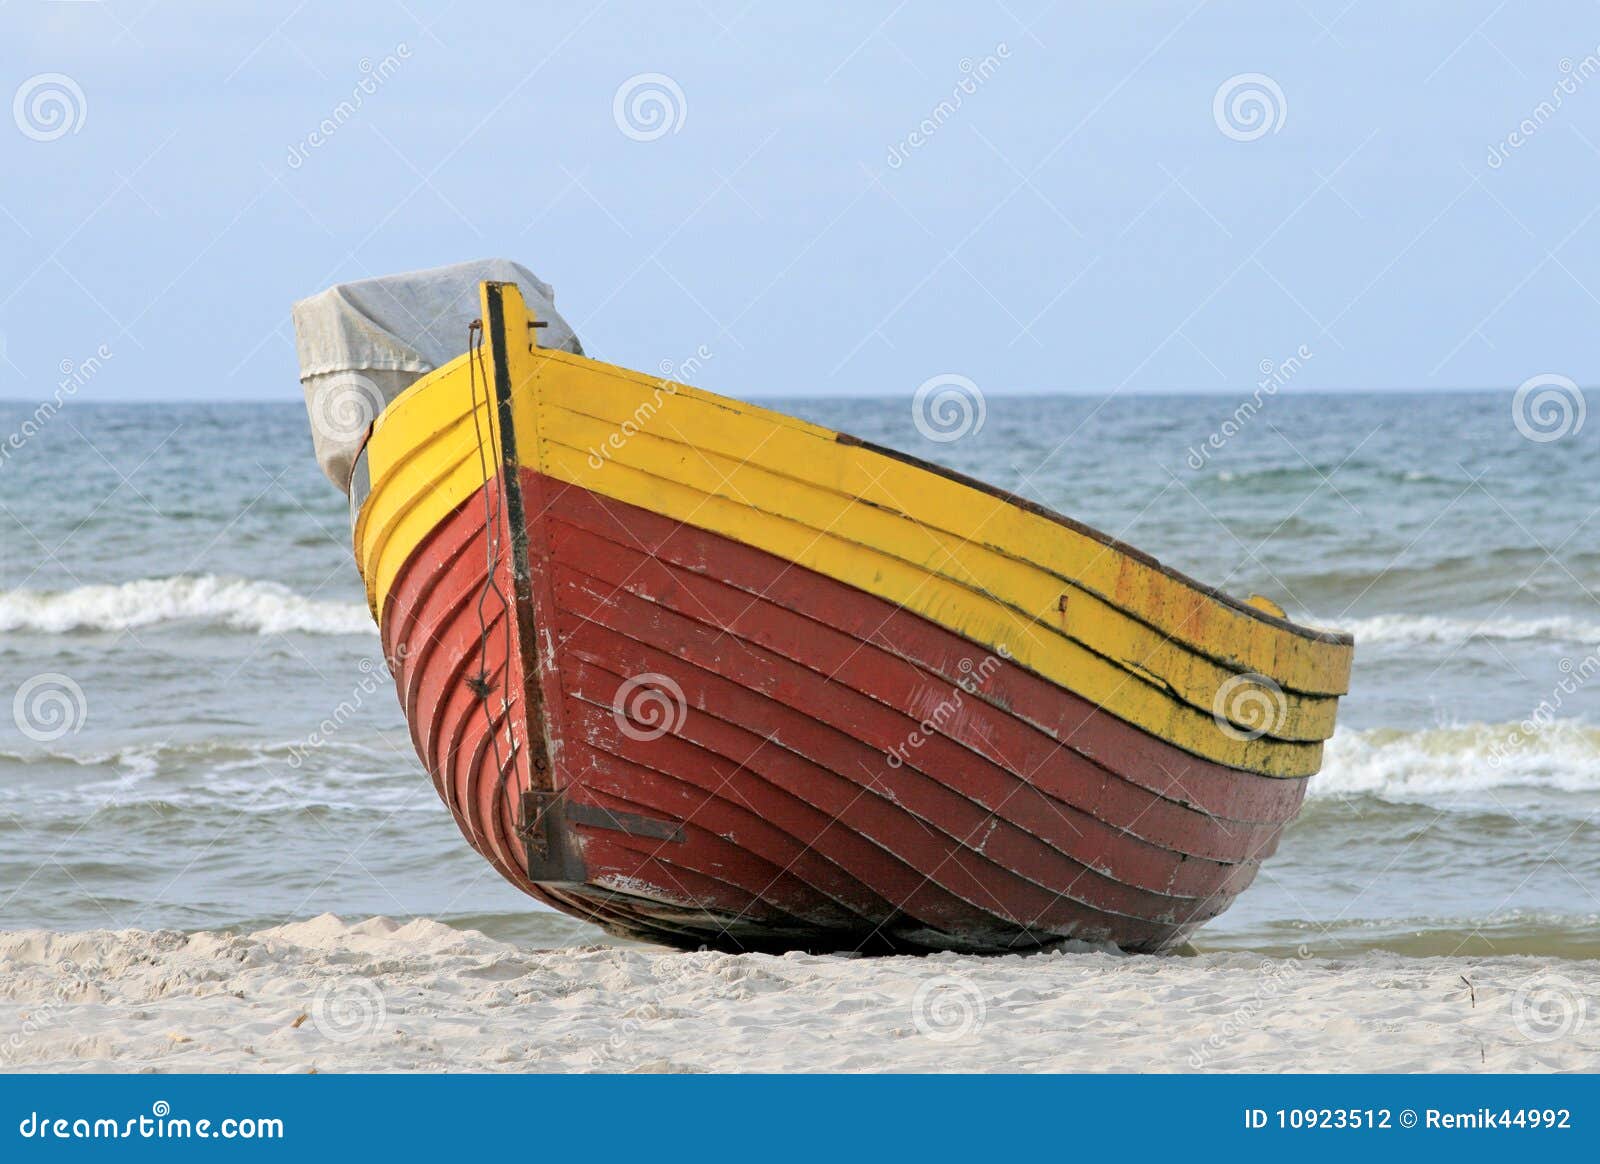 Wooden Boat Stock Photography - Image: 10923512